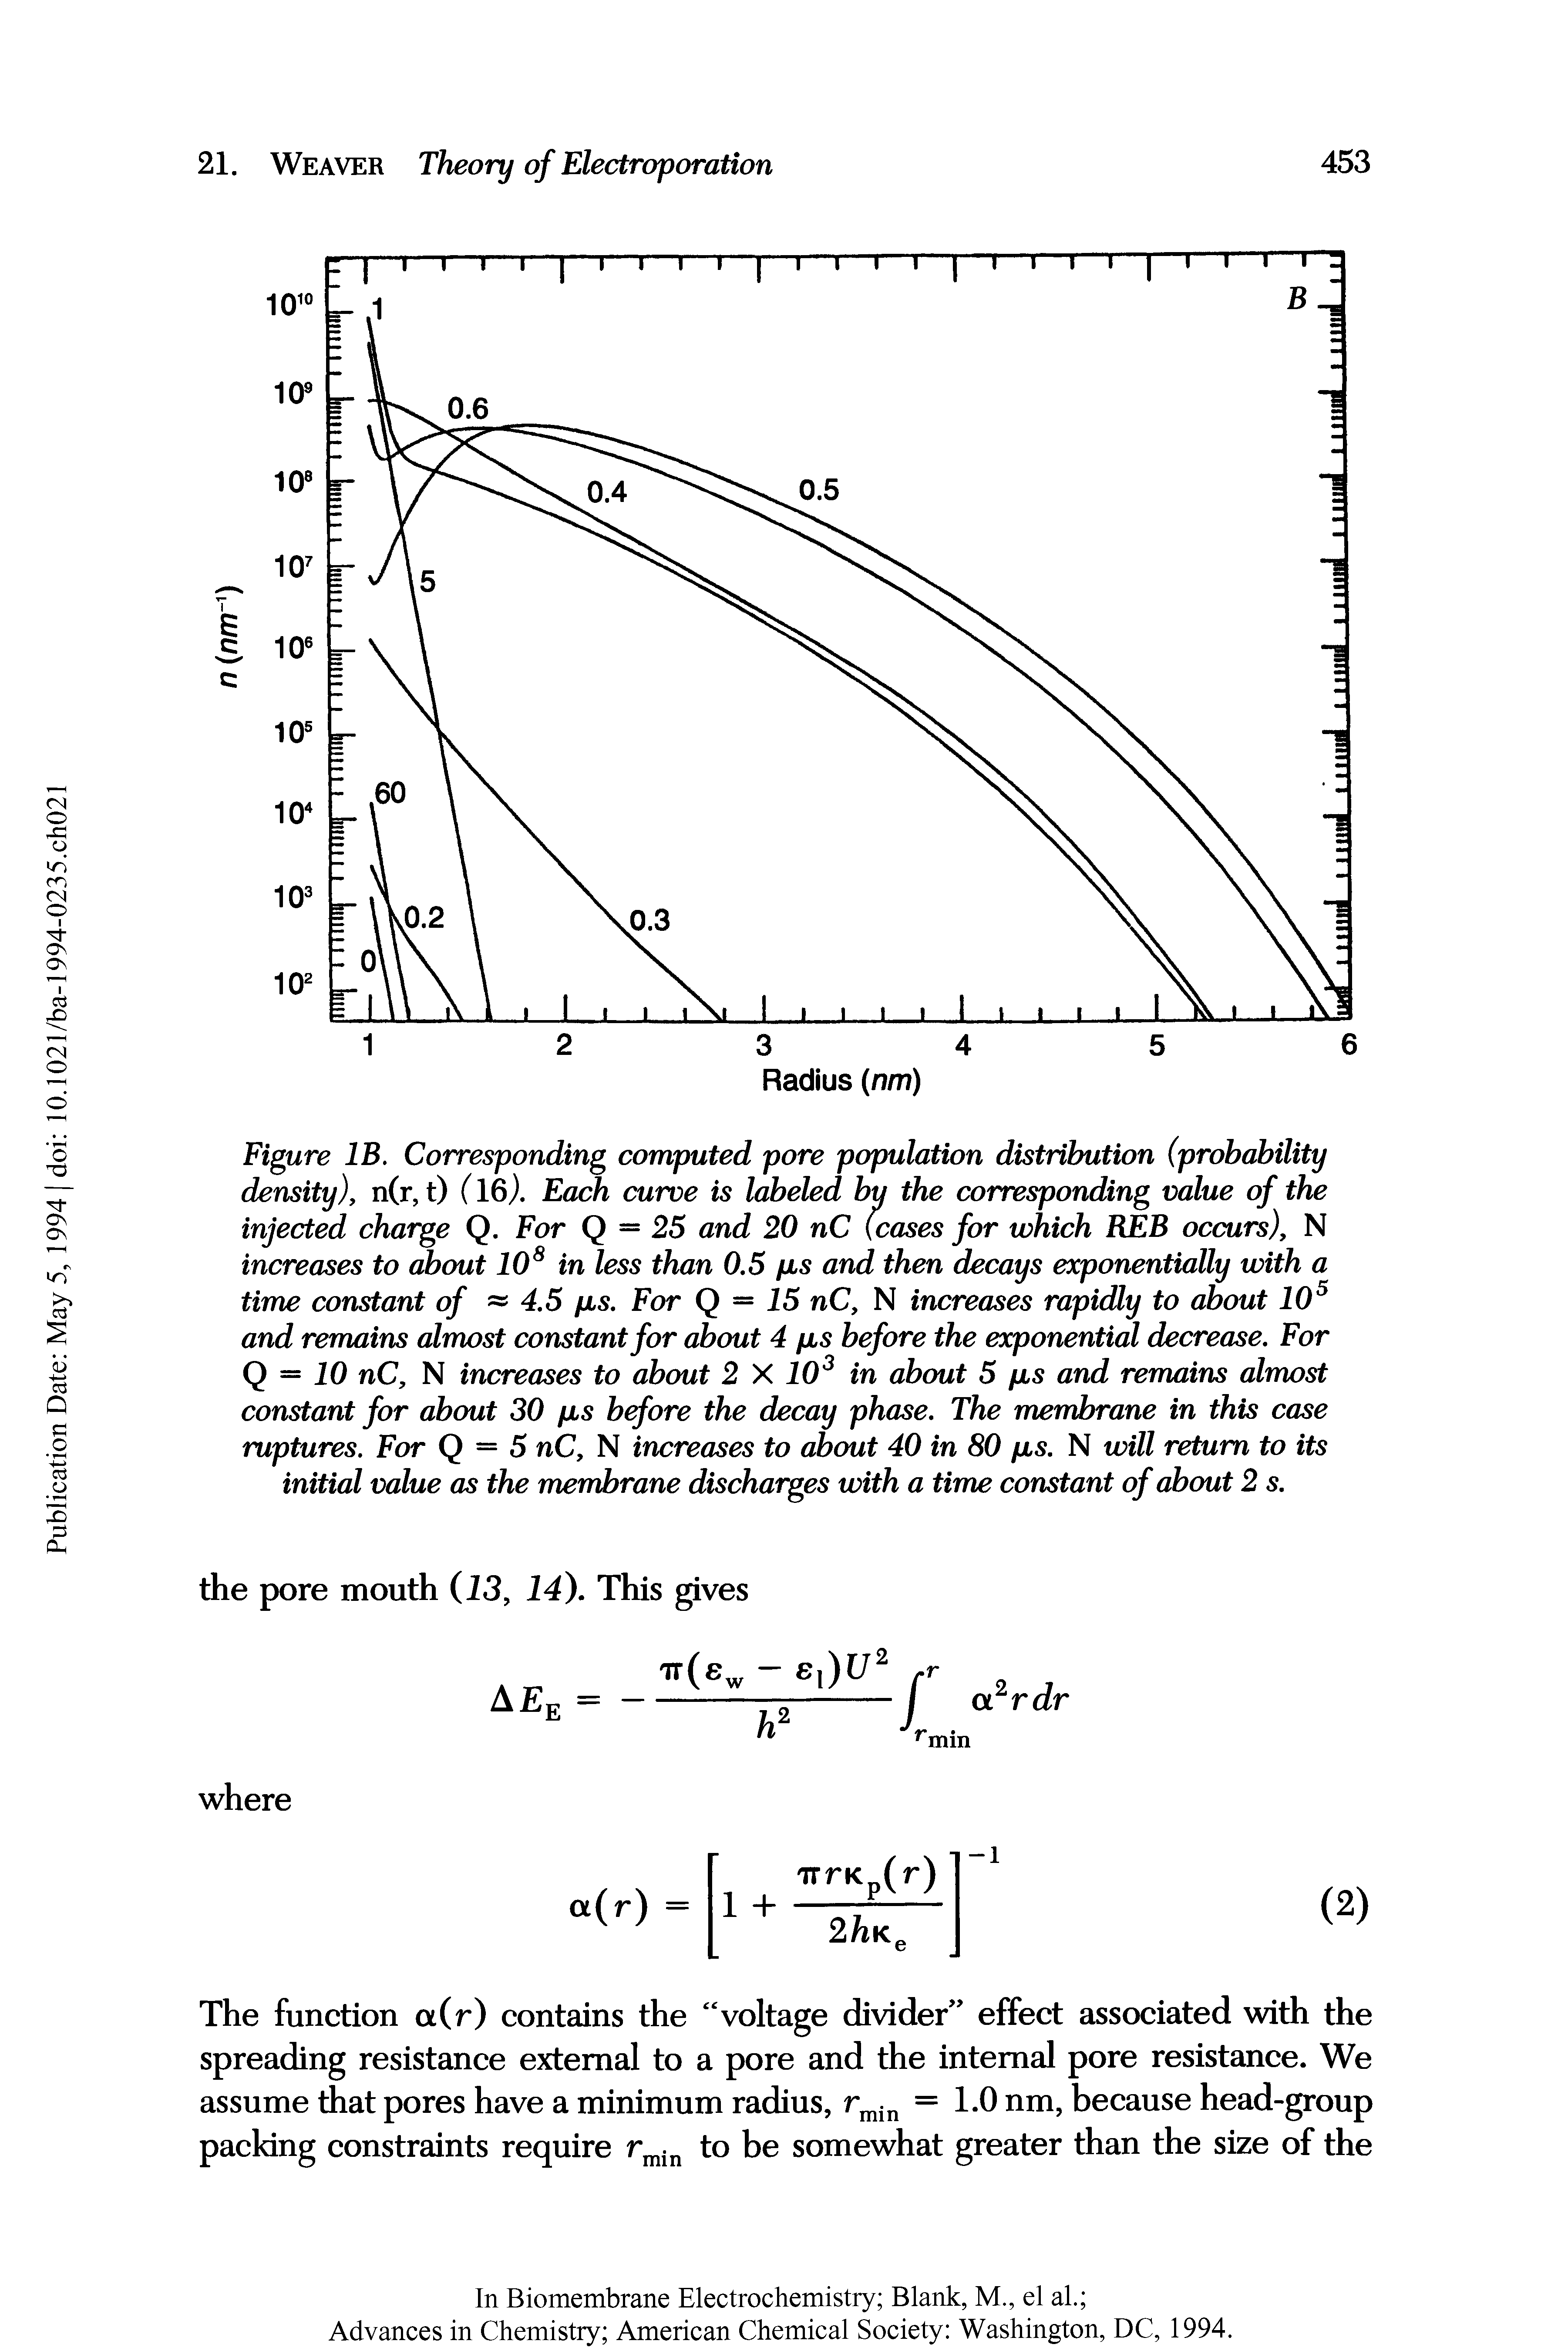 Figure IB. Corresponding computed pore population distribution (probability density), n(r, t) (16). Each curve is labeled by the corresponding value of the injected charge Q. For Q = 25 and 20 nC (cases for which REB occurs), N increases to about 108 in less than 0.5 pus and then decays exponentially with a time constant of 4.5 pus. For Q — 15 nC, N increases rapidly to about 105 and remains almost constant for about 4 pus before the exponential decrease. For Q — 10 nC, N increases to about 2 X 103 in about 5 pus and remains almost constant for about 30 pus before the decay phase. The membrane in this case ruptures. For Q = 5 nC, N increases to about 40 in 80 pus. N will return to its initial value as the membrane discharges with a time constant of about 2 s.